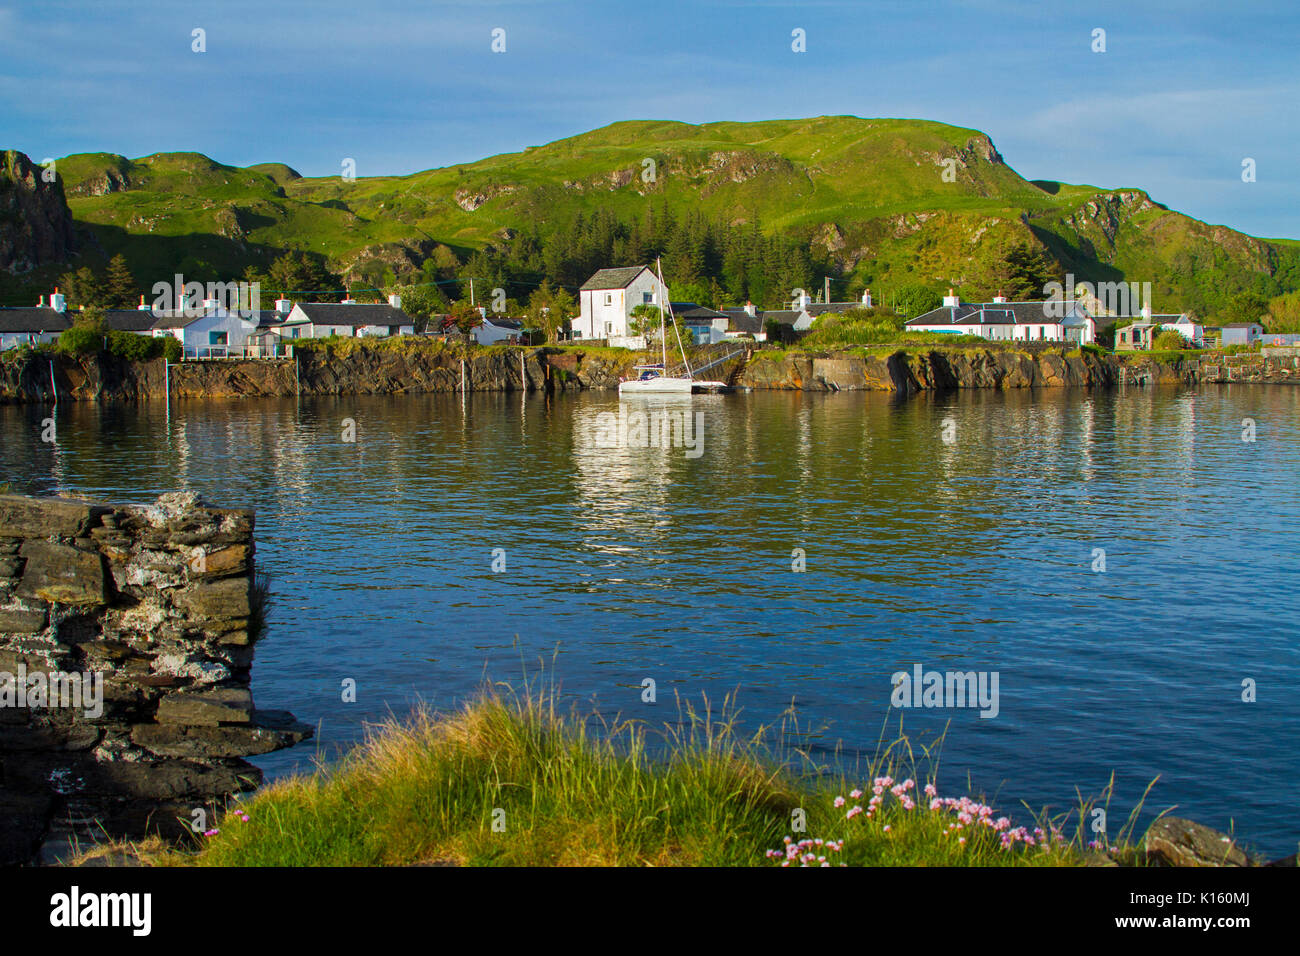 Stunning view of village of Ellenabeich / Easdale, Seil Island, Scotland, with white cottages at base of rocky hill & beside calm blue waters of ocean Stock Photo